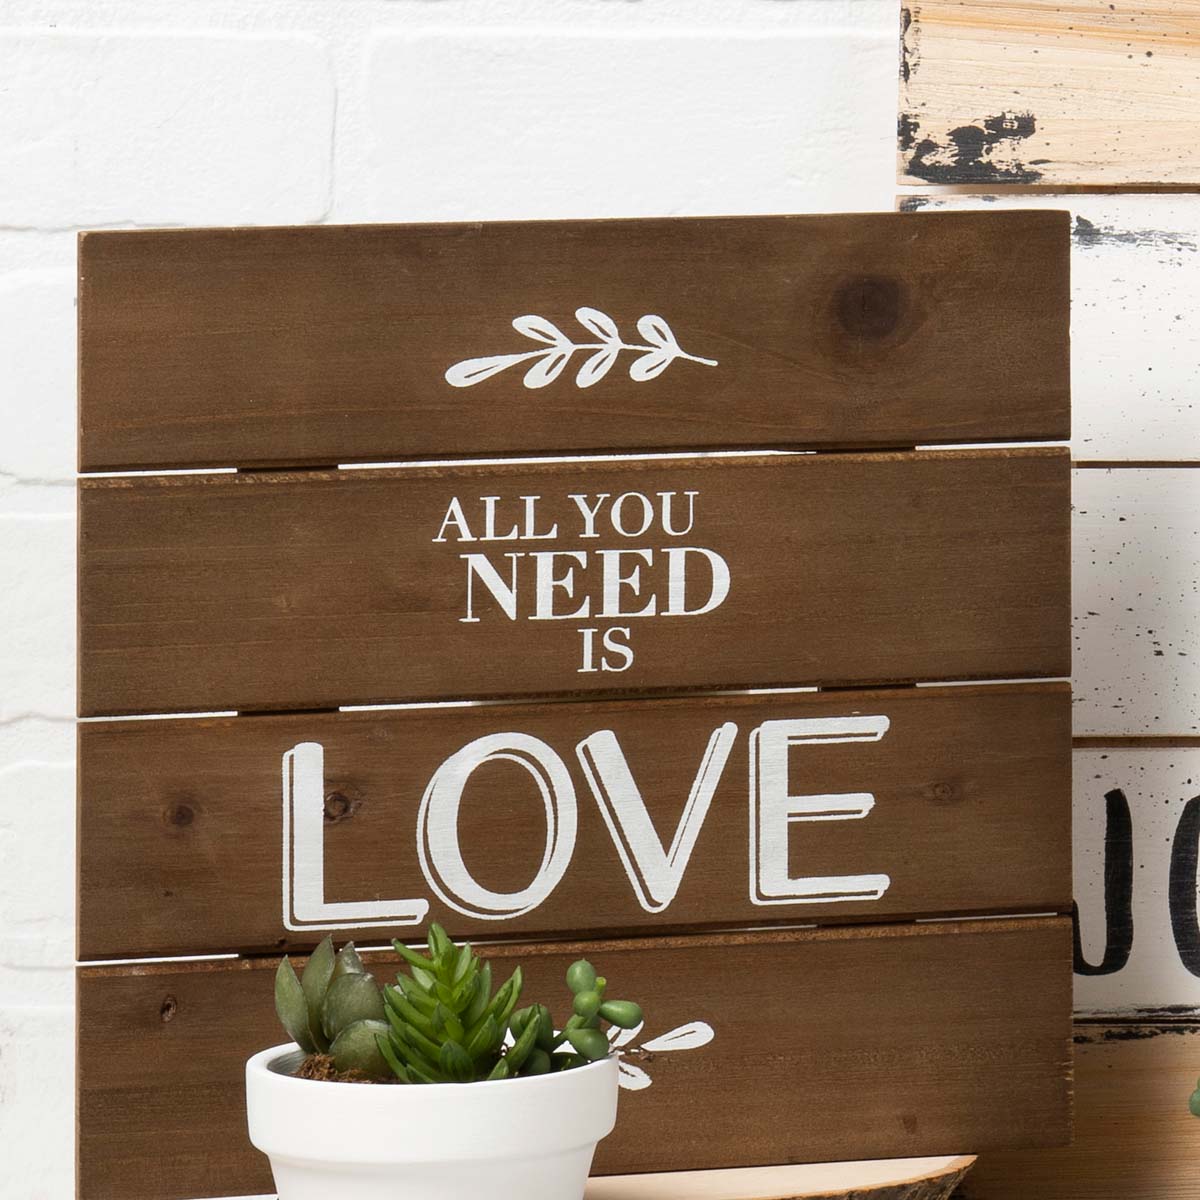 All You Need is Love Wood Pallet Sign